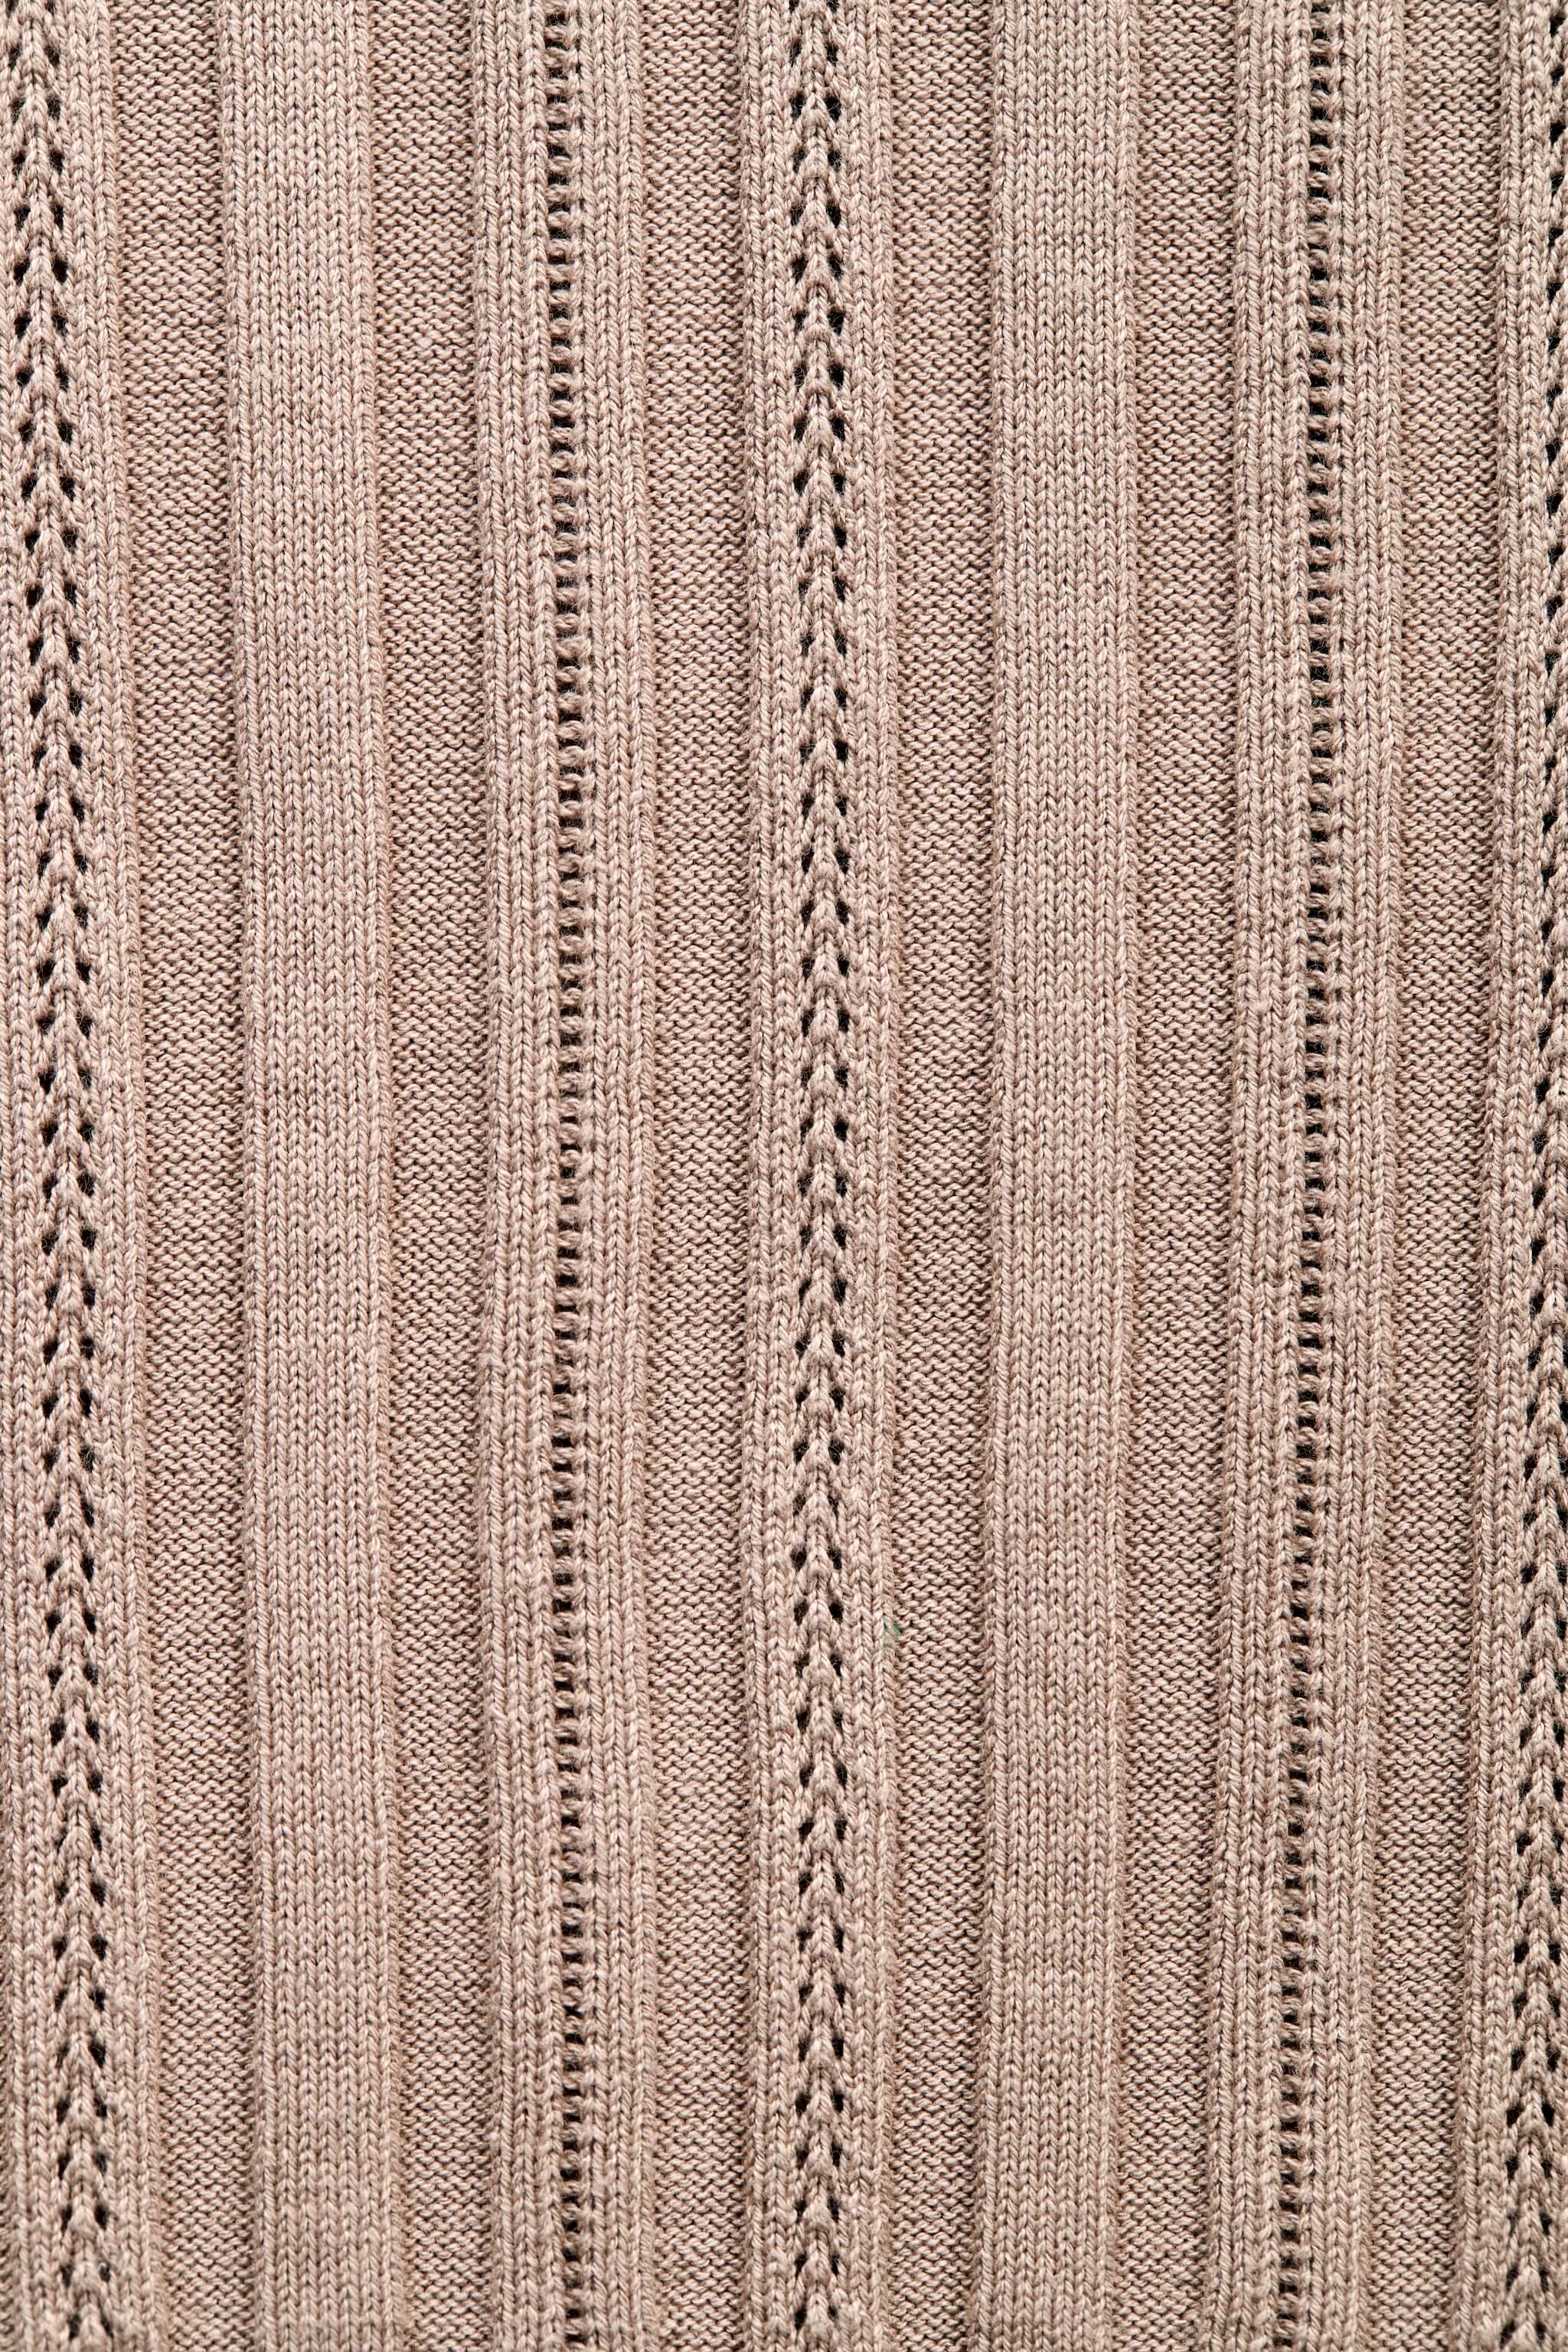 Close-up of the intricate knit pattern on a taupe garment, showcasing Cyme Copenhagen's attention to detail and craftsmanship in sustainable materials for their Danish fashion brand, specializing in women's clothing.